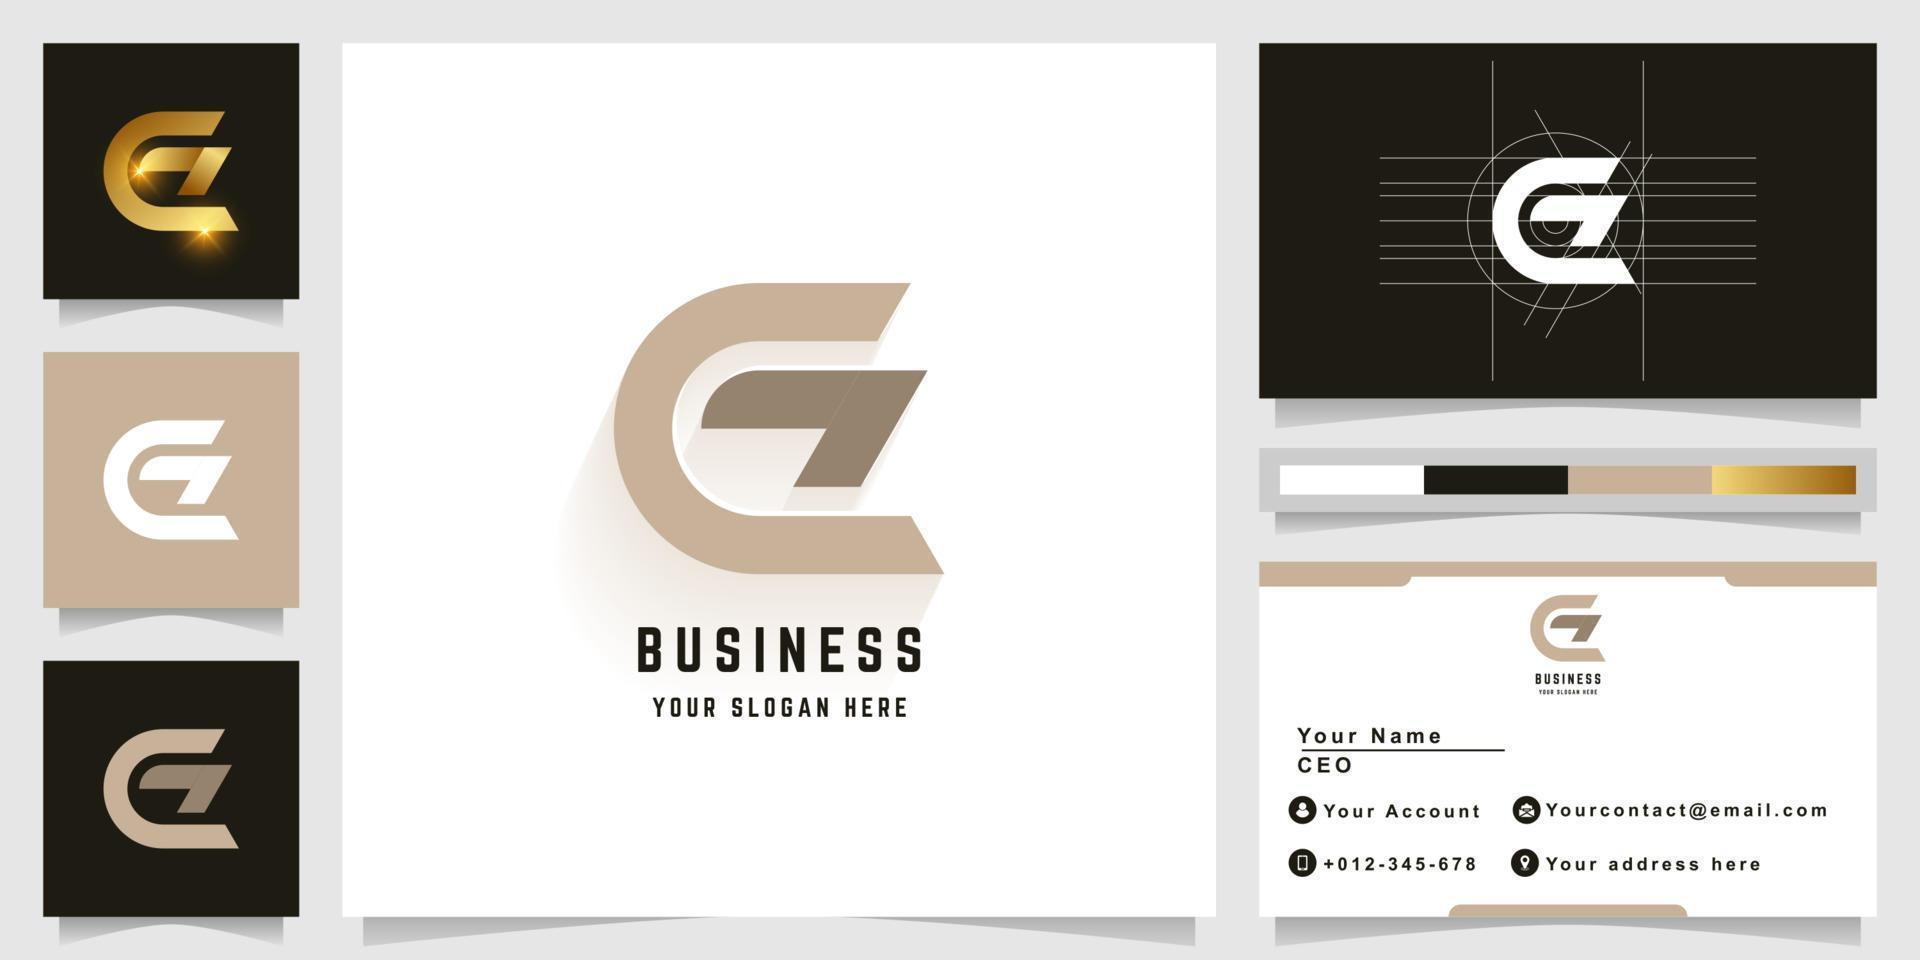 Letter CZ or GZ monogram logo with business card design vector